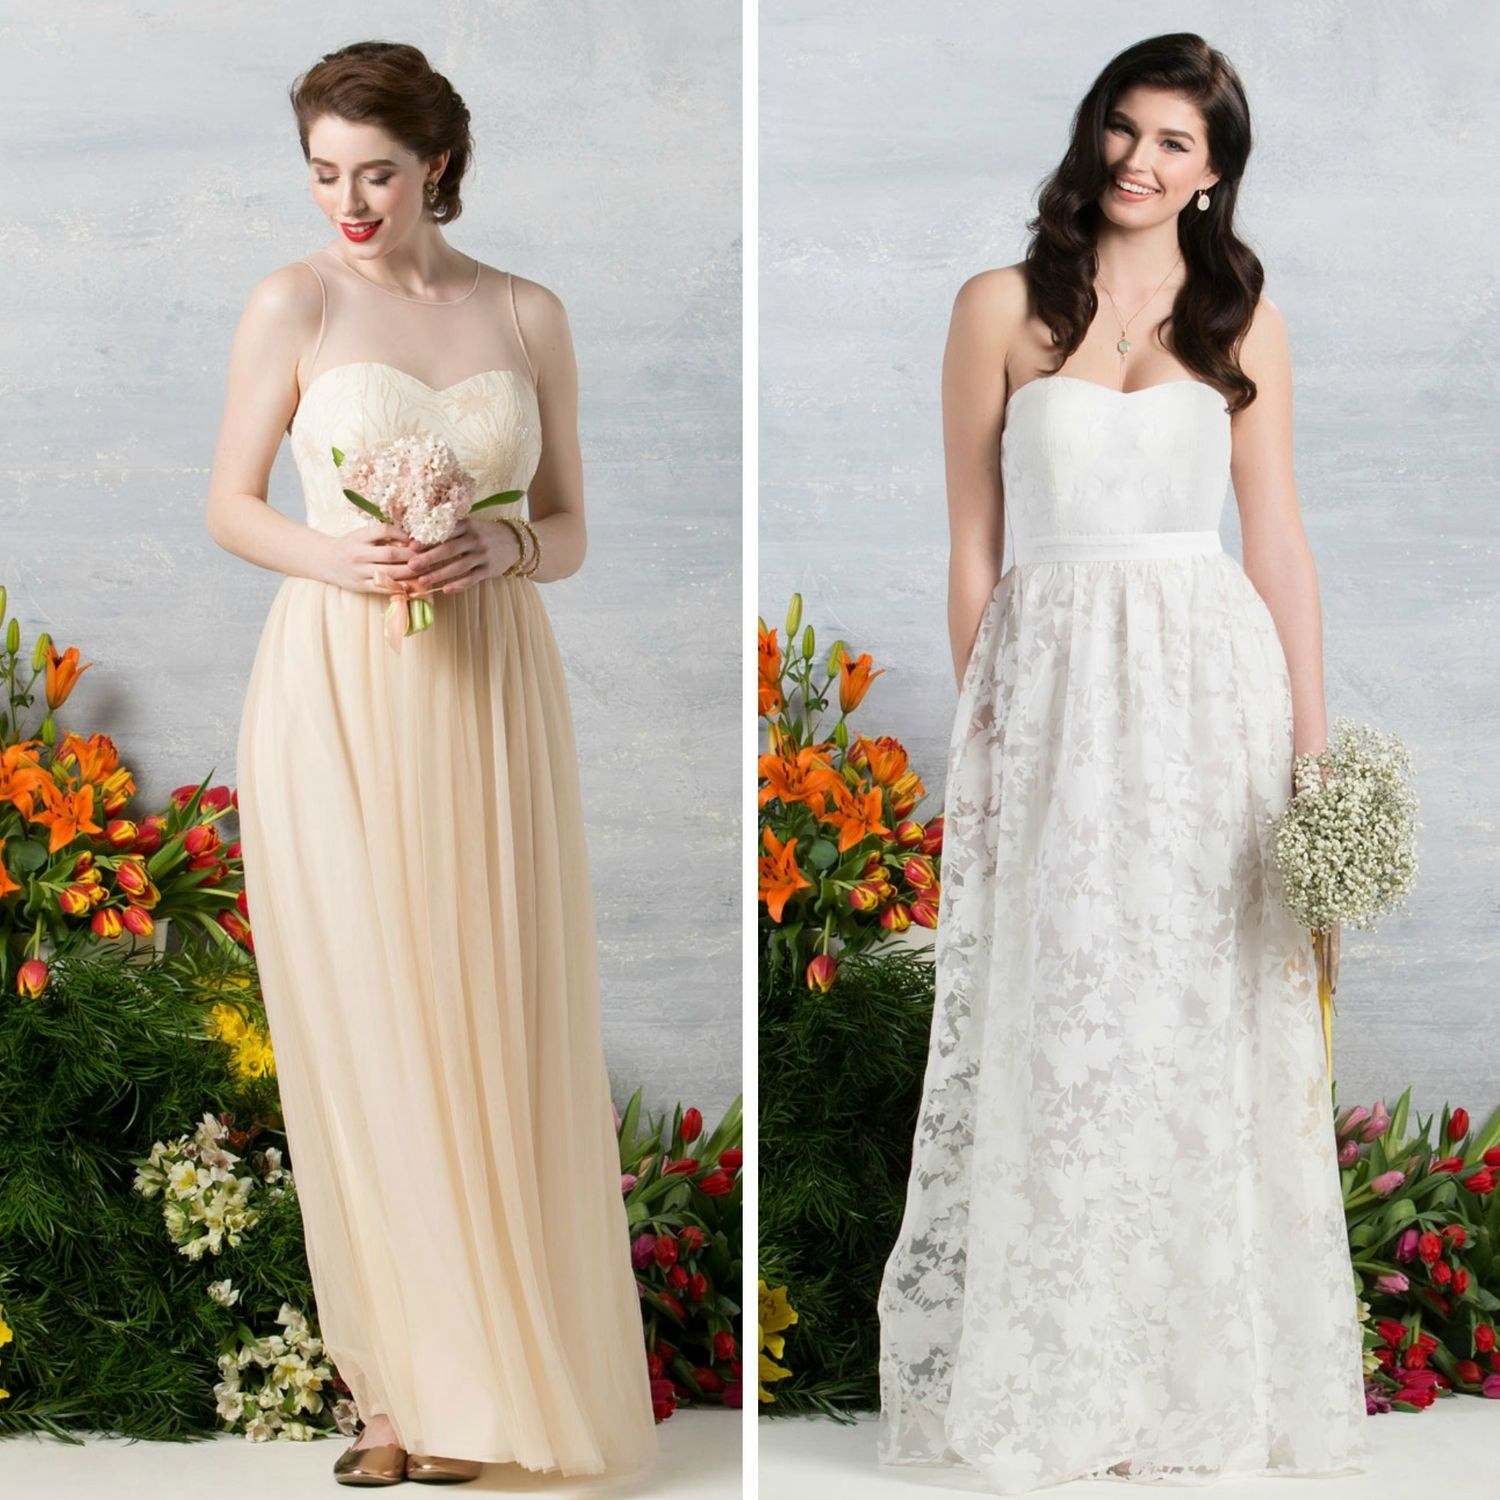 Affordable Wedding Gowns
 ModCloth Has a Brand New Collection of Wedding Dresses All